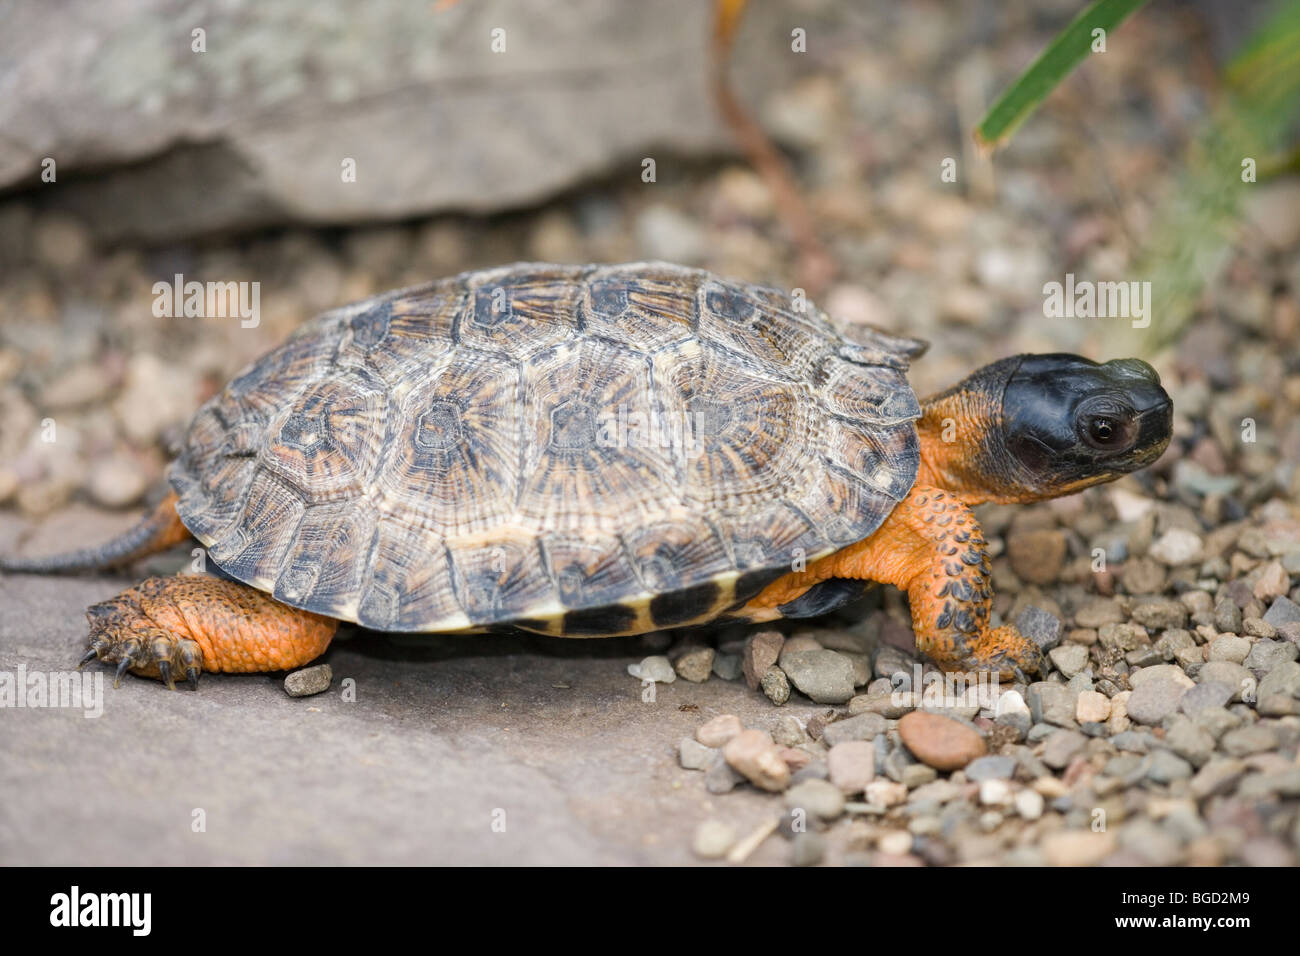 Wood Turtle (Glyptemys insculpta). North America. Reputation as a particularly intelligent reptile. Stock Photo